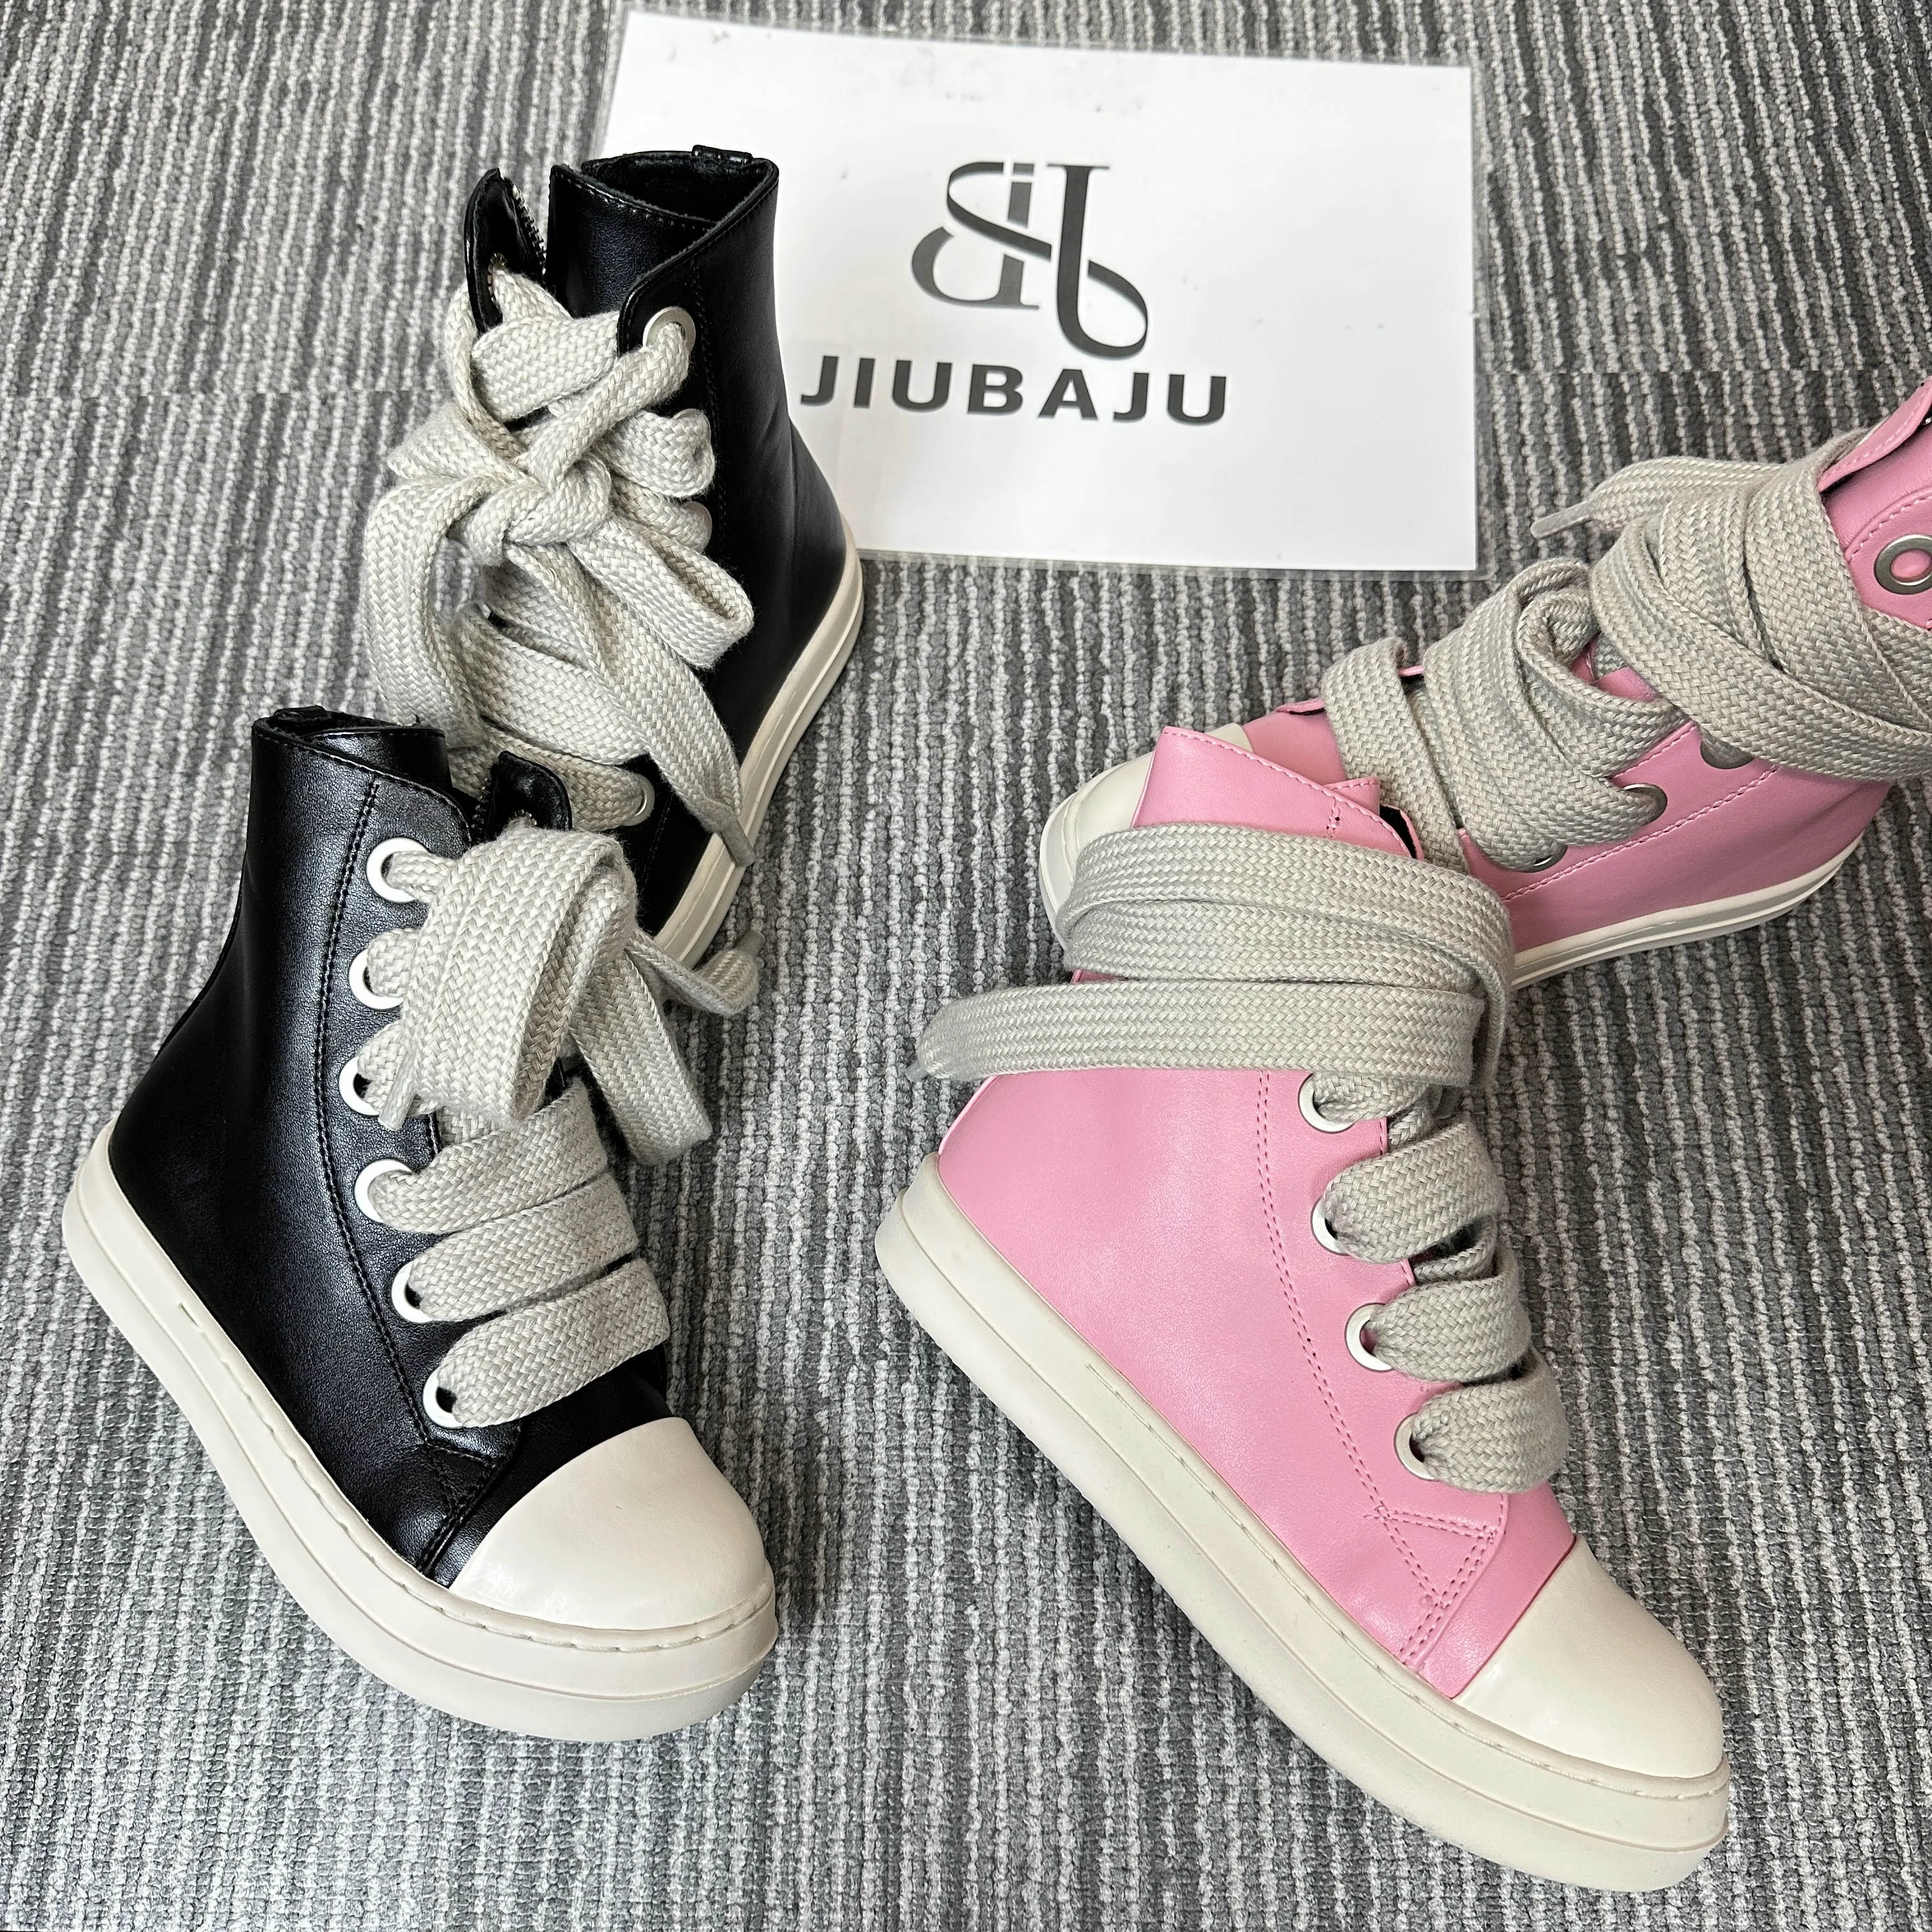 Boy PU Leather Shoes High Top Kids Girls Shoes Black Pink Children Casual Leather Boots